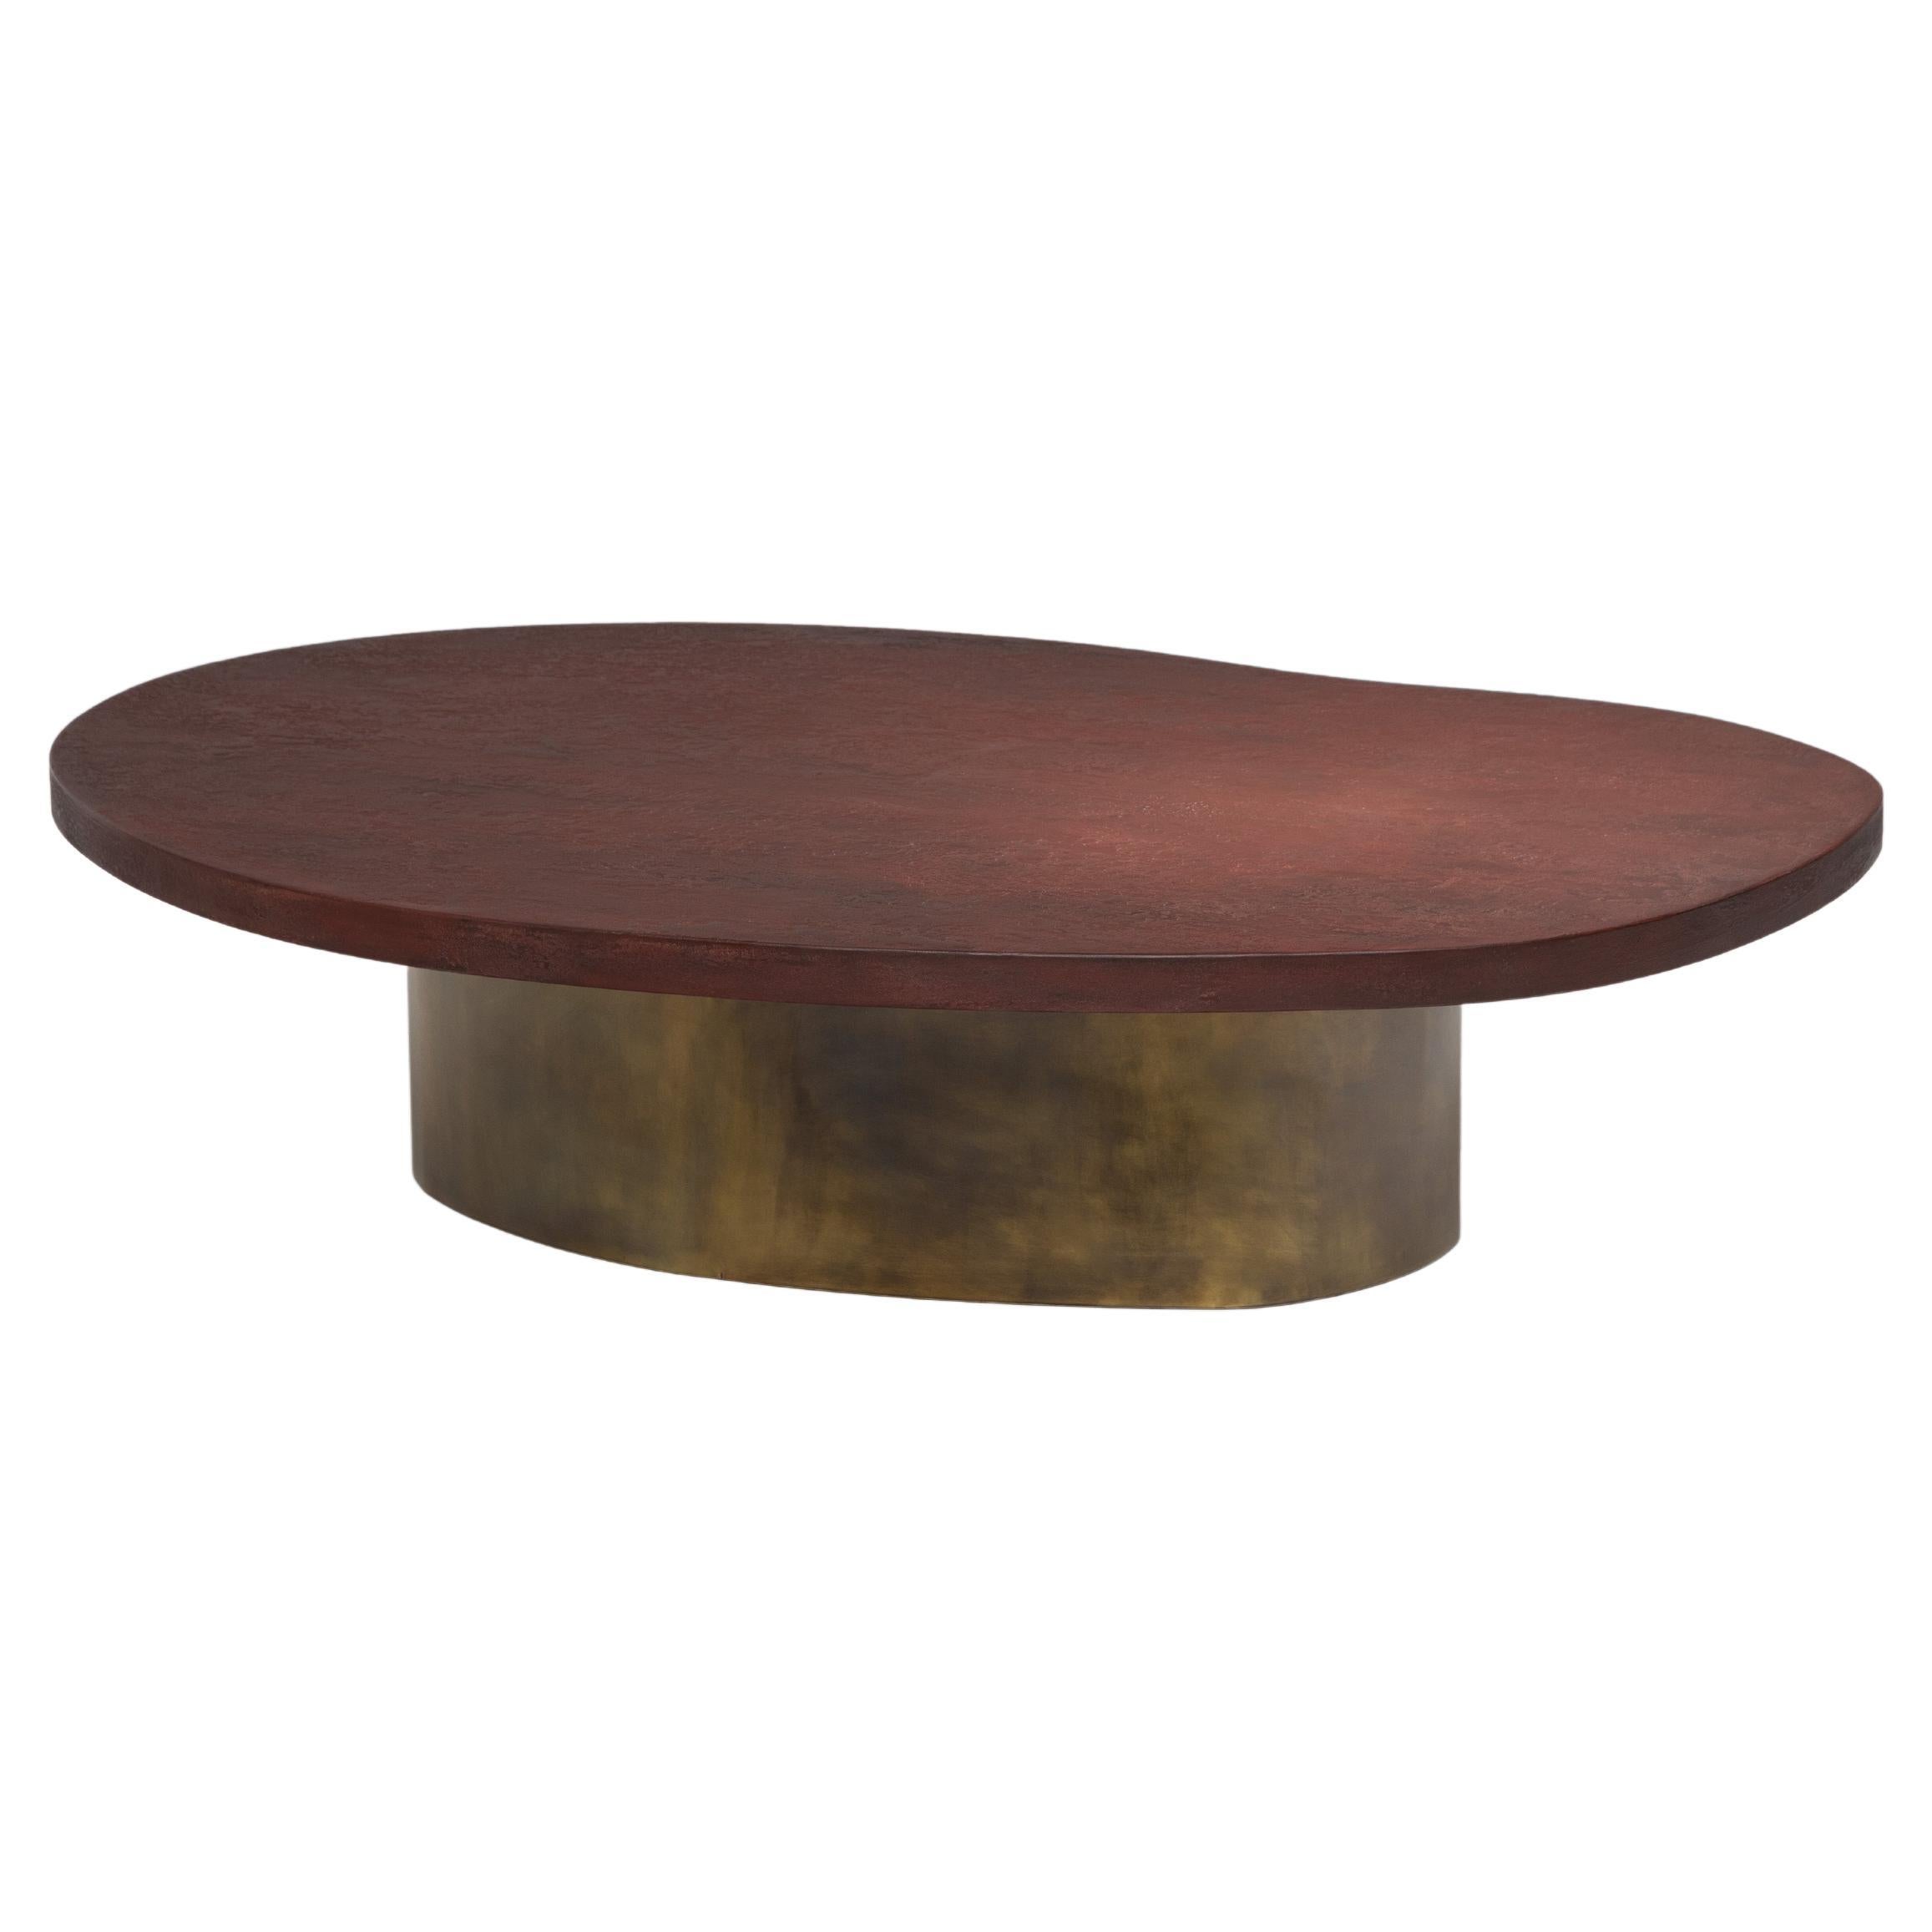 Pierre Bonnefille Table Basse Stone Cuprite Matte - mixed media coffee table